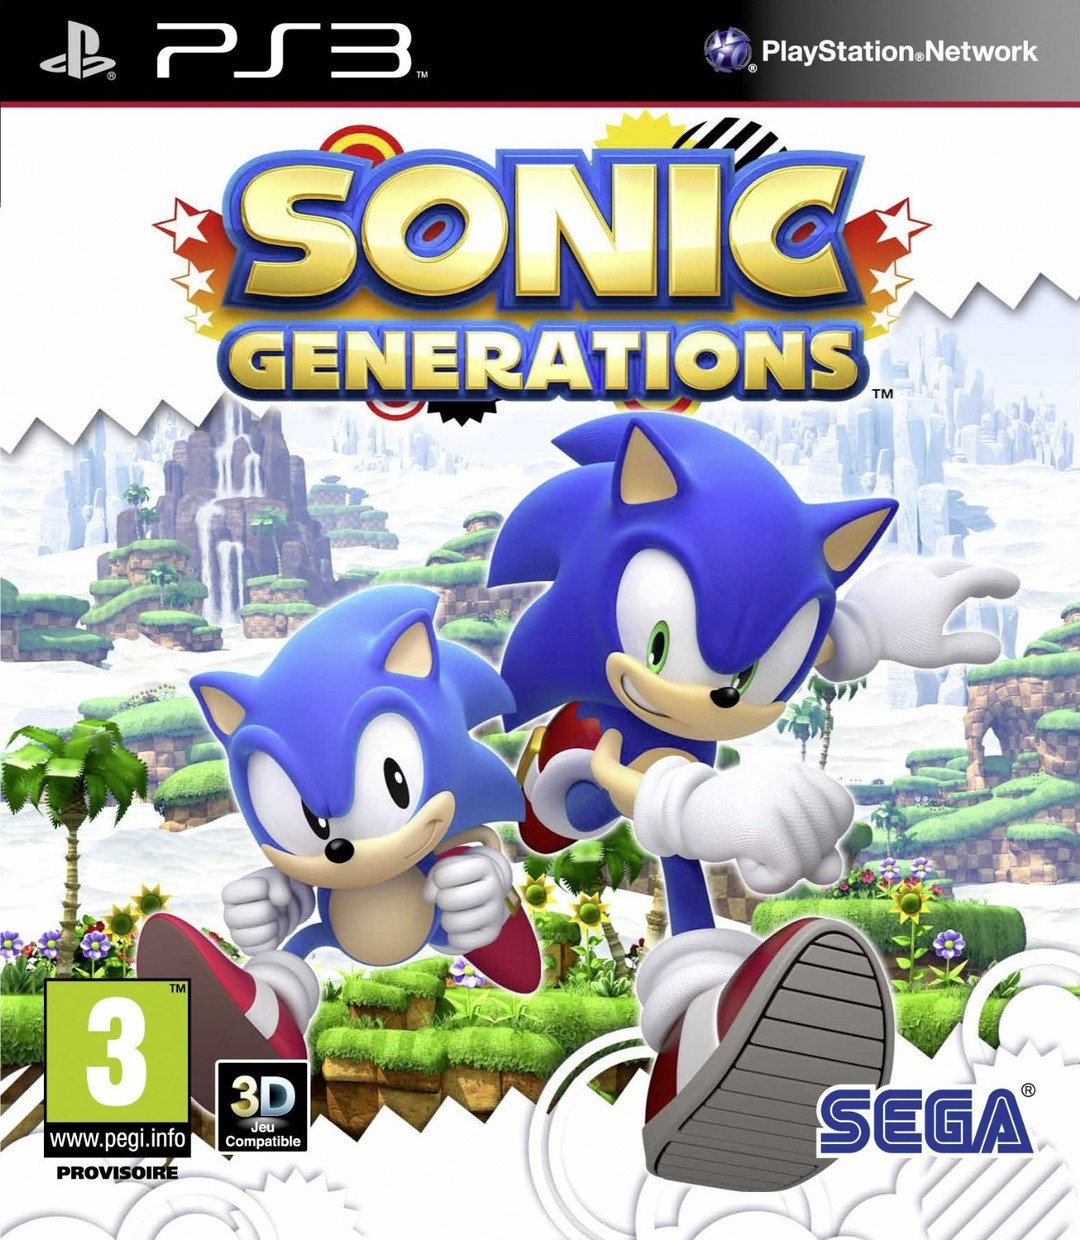 jaquette-sonic-generations-playstation-3-ps3-cover-avant-g-1308561679.jpg